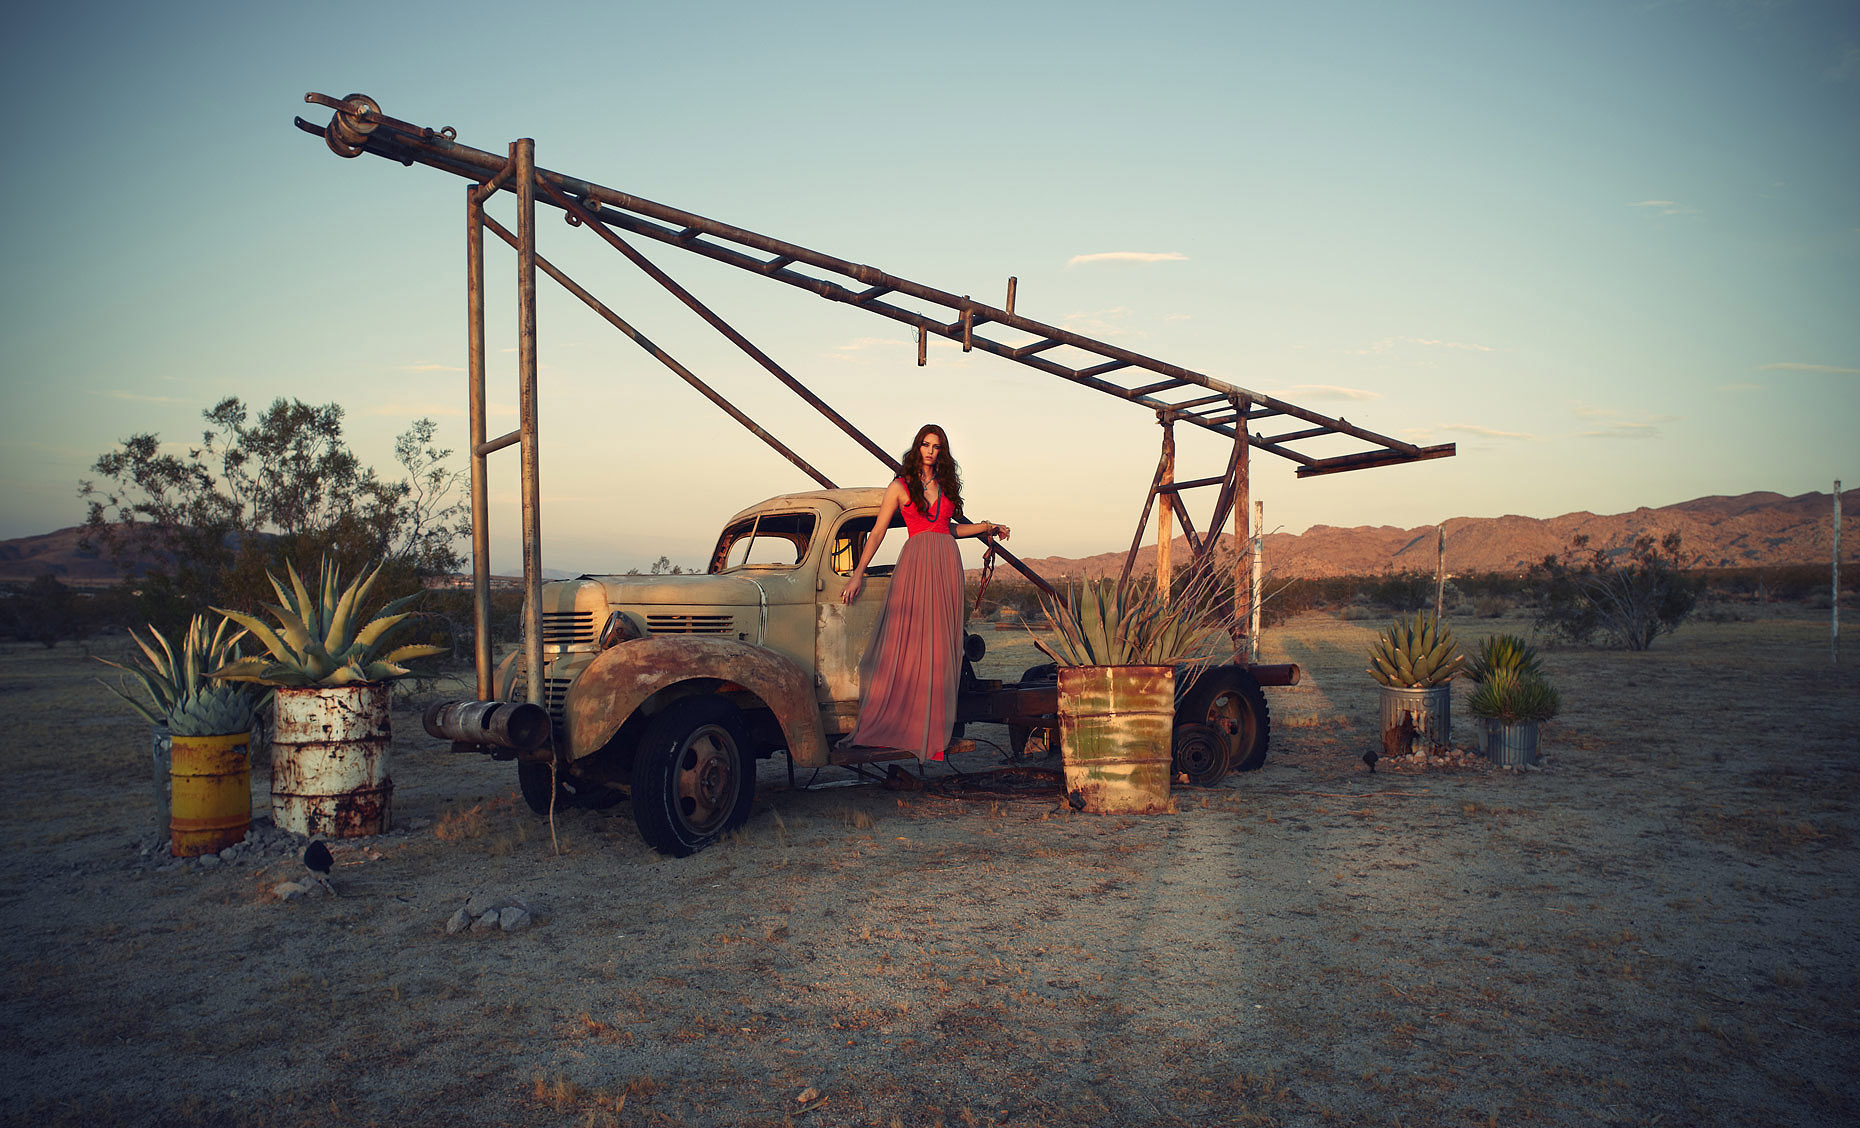 Red headed woman in evening gown standing on truck relic